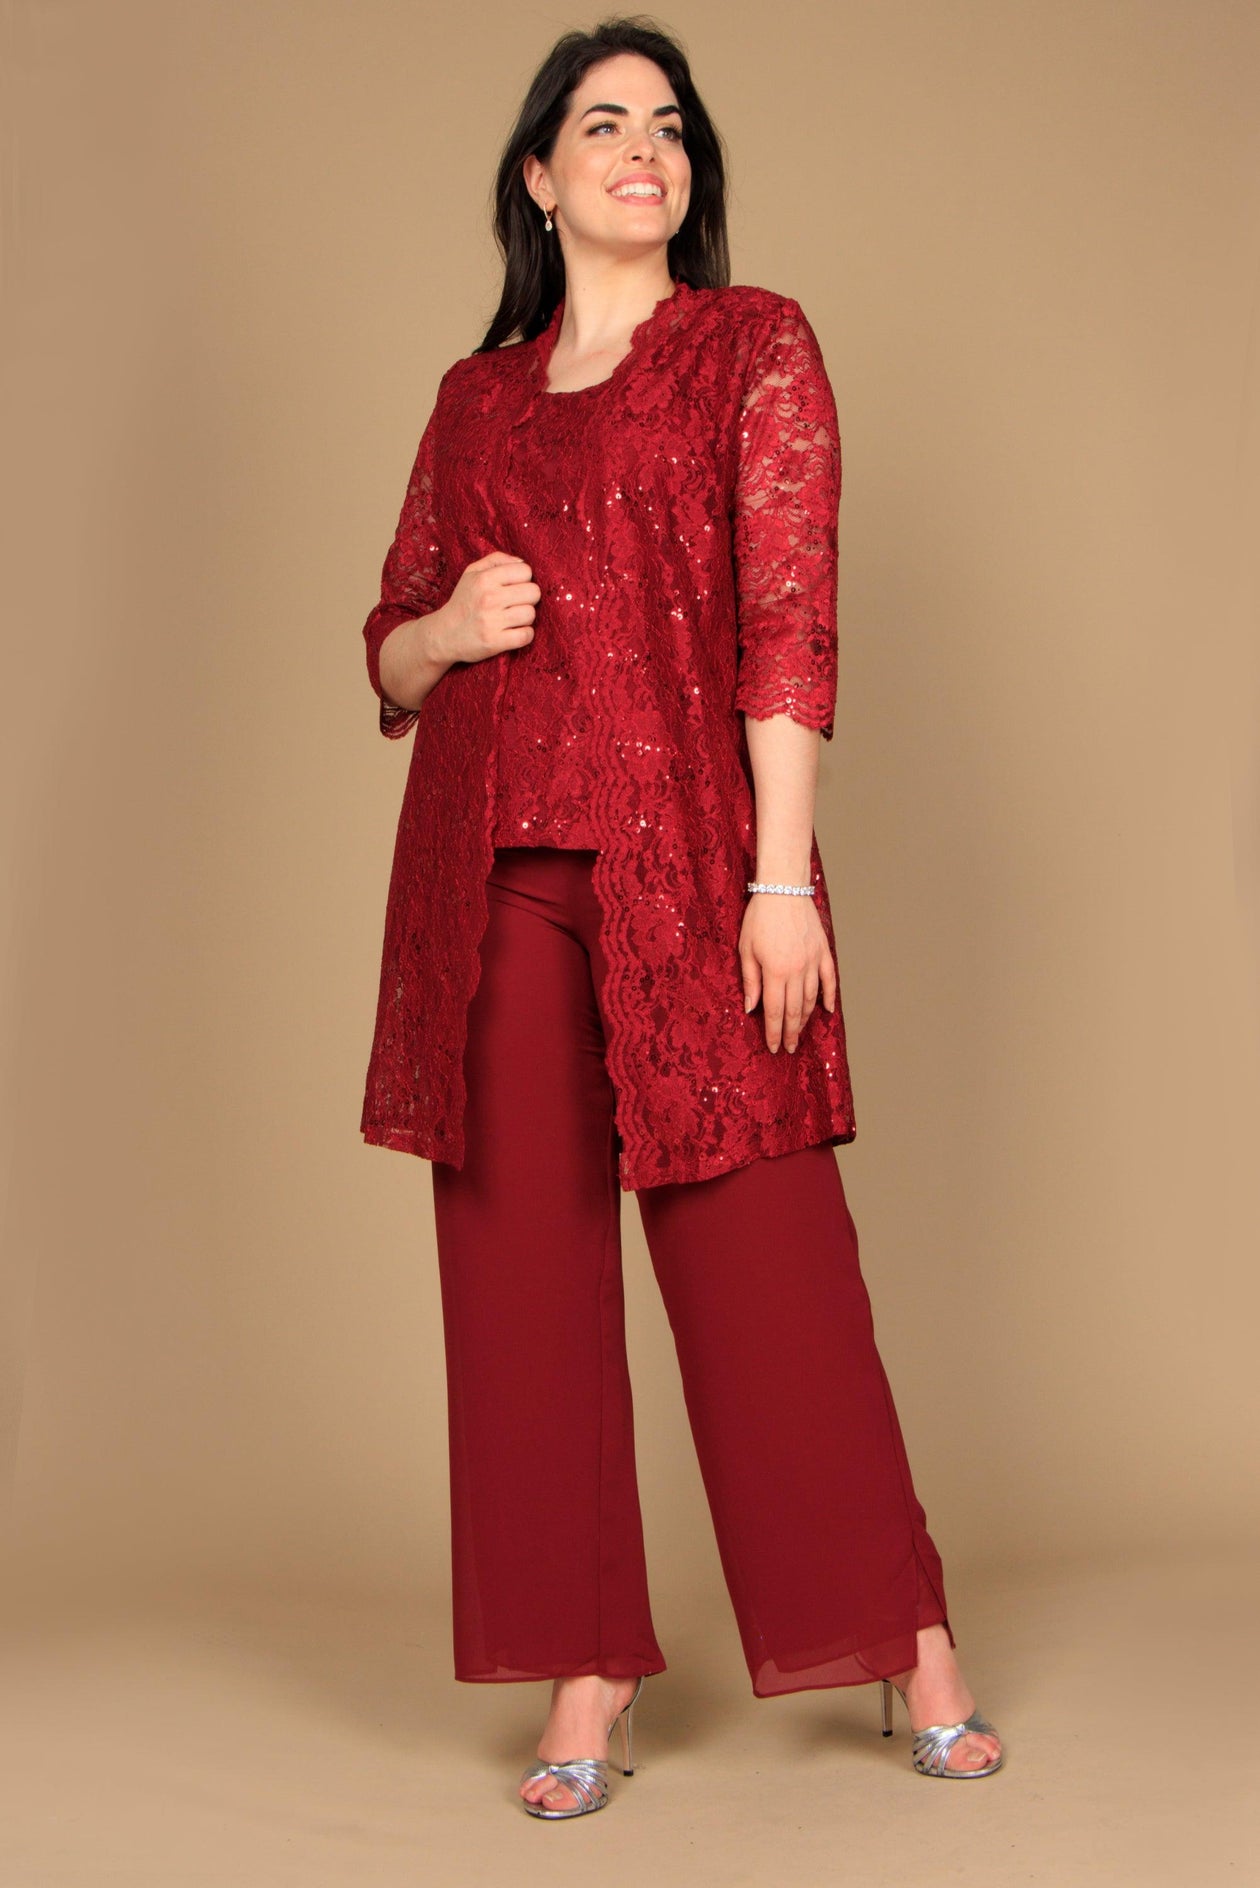 Burgundy Mother of the Bride Jacket Pant Suit for $129.99 – The Dress Outlet